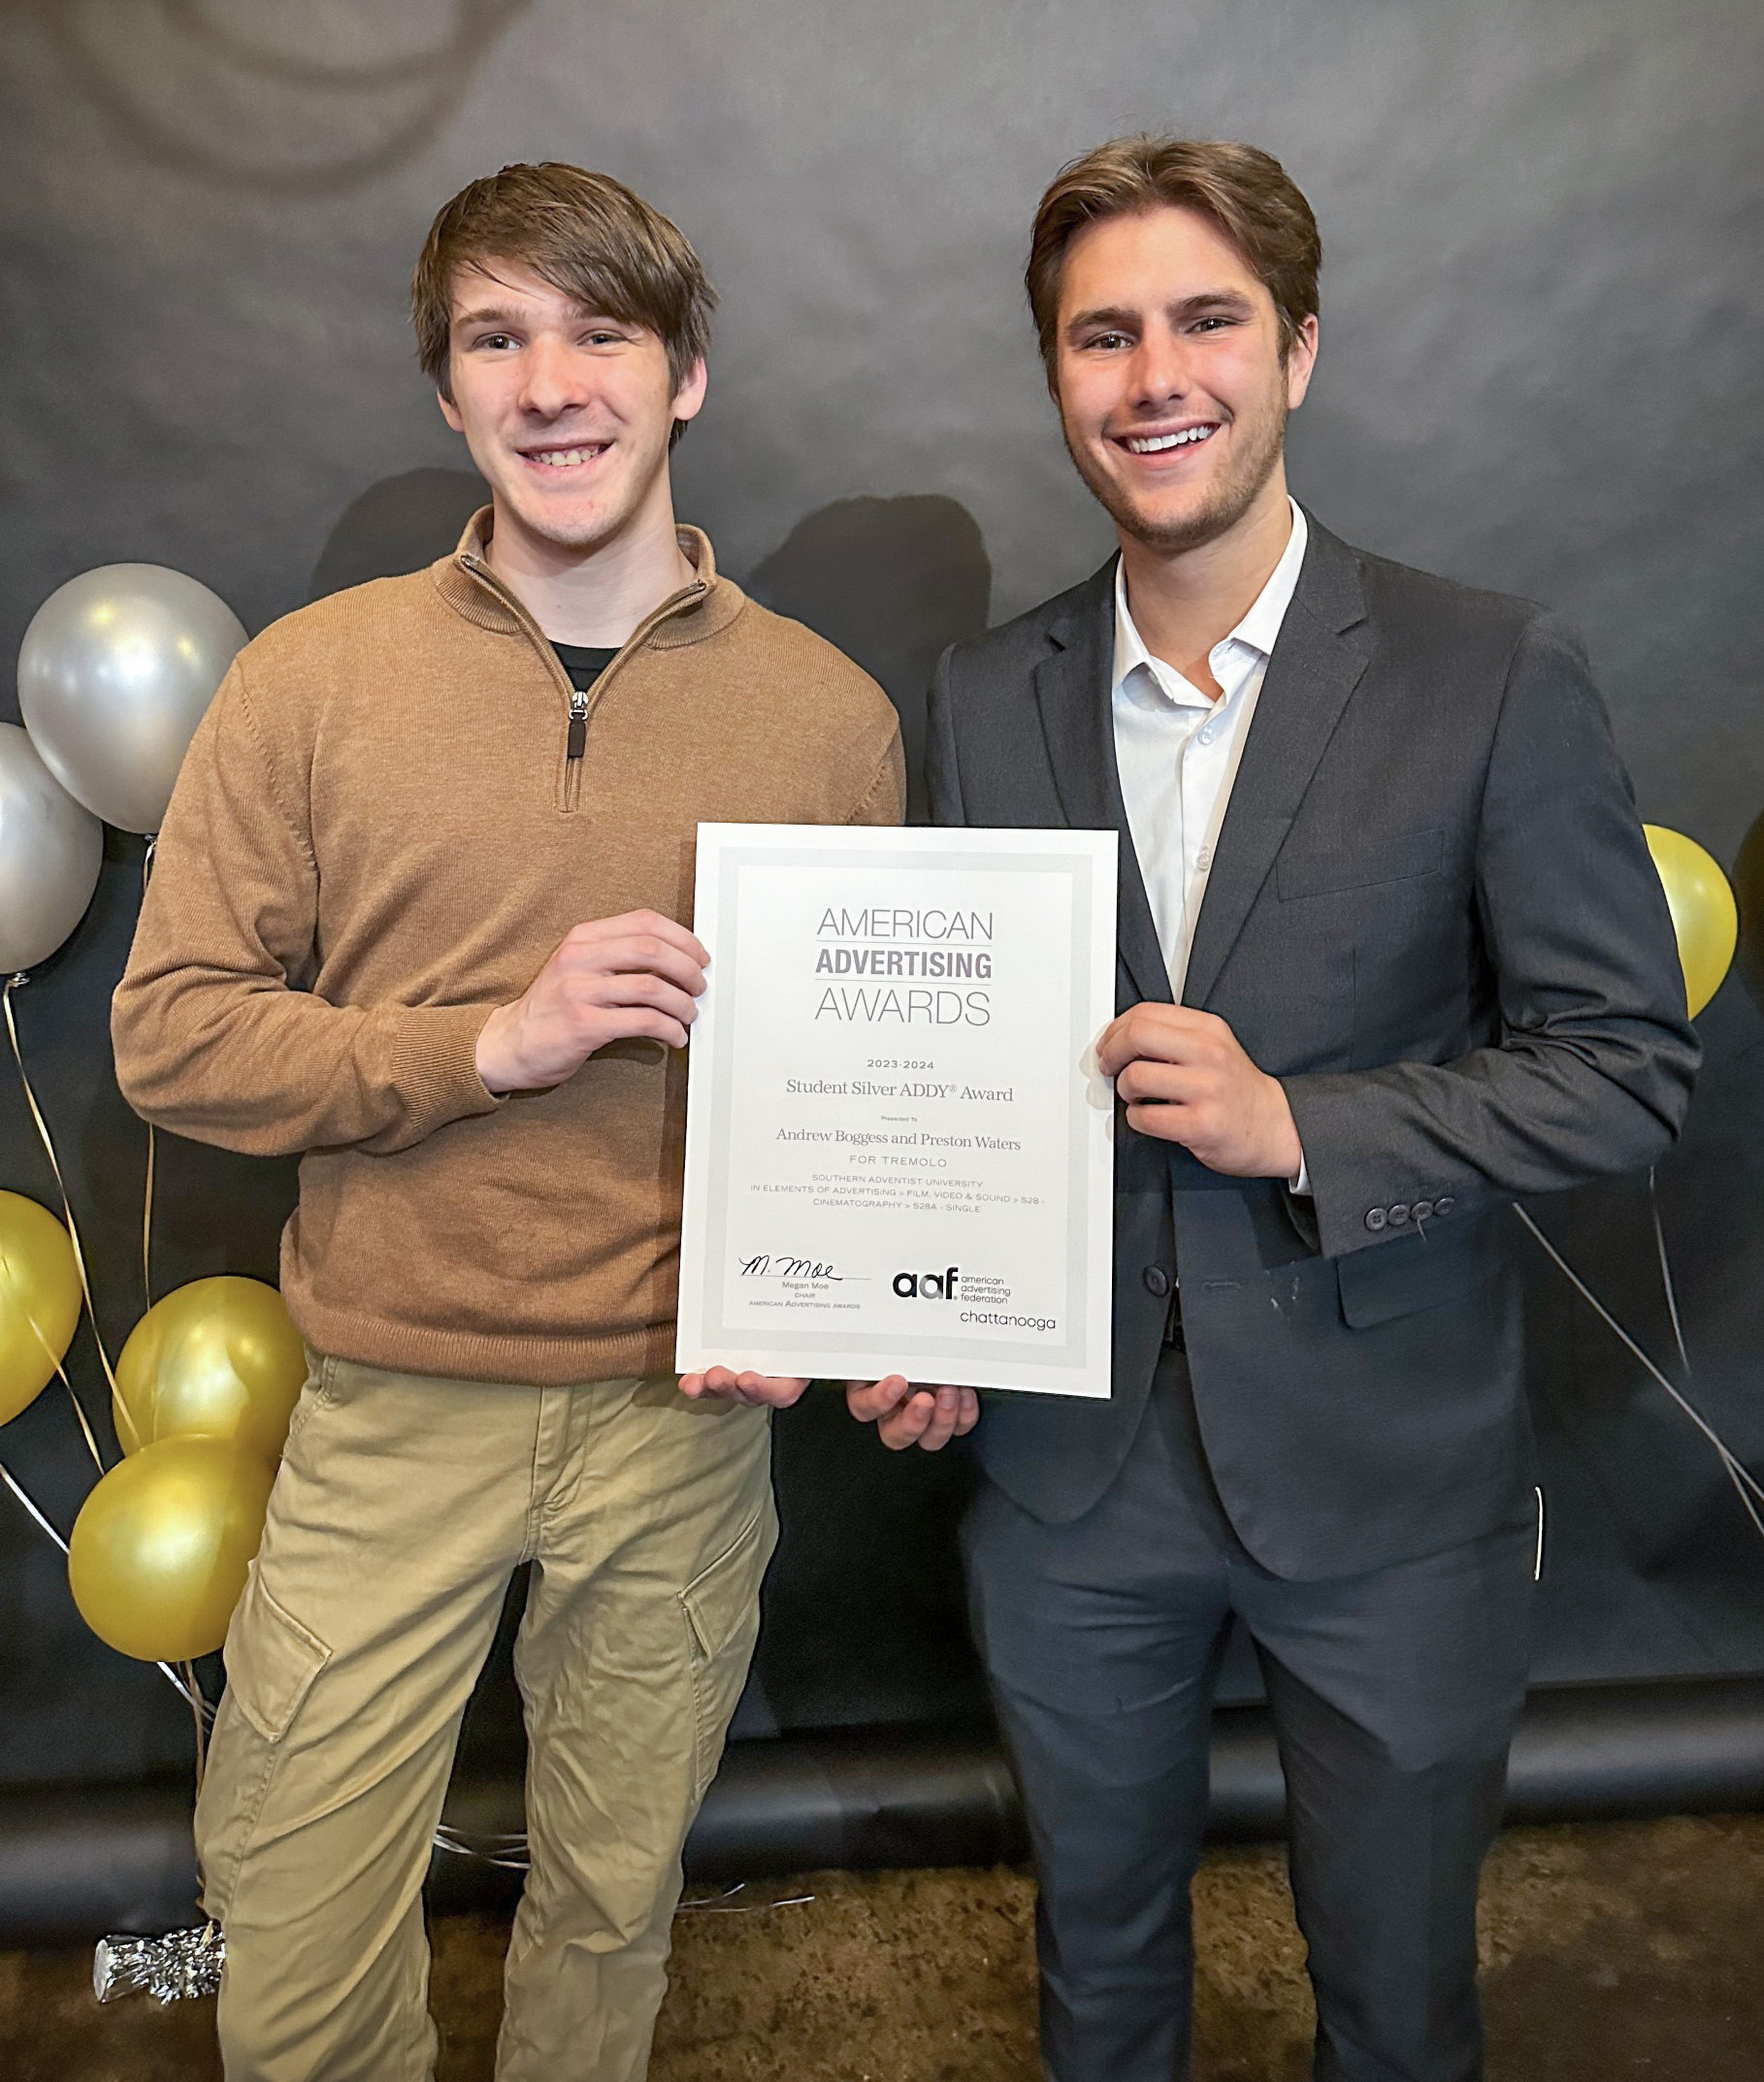 Two young men holding an award and smiling.